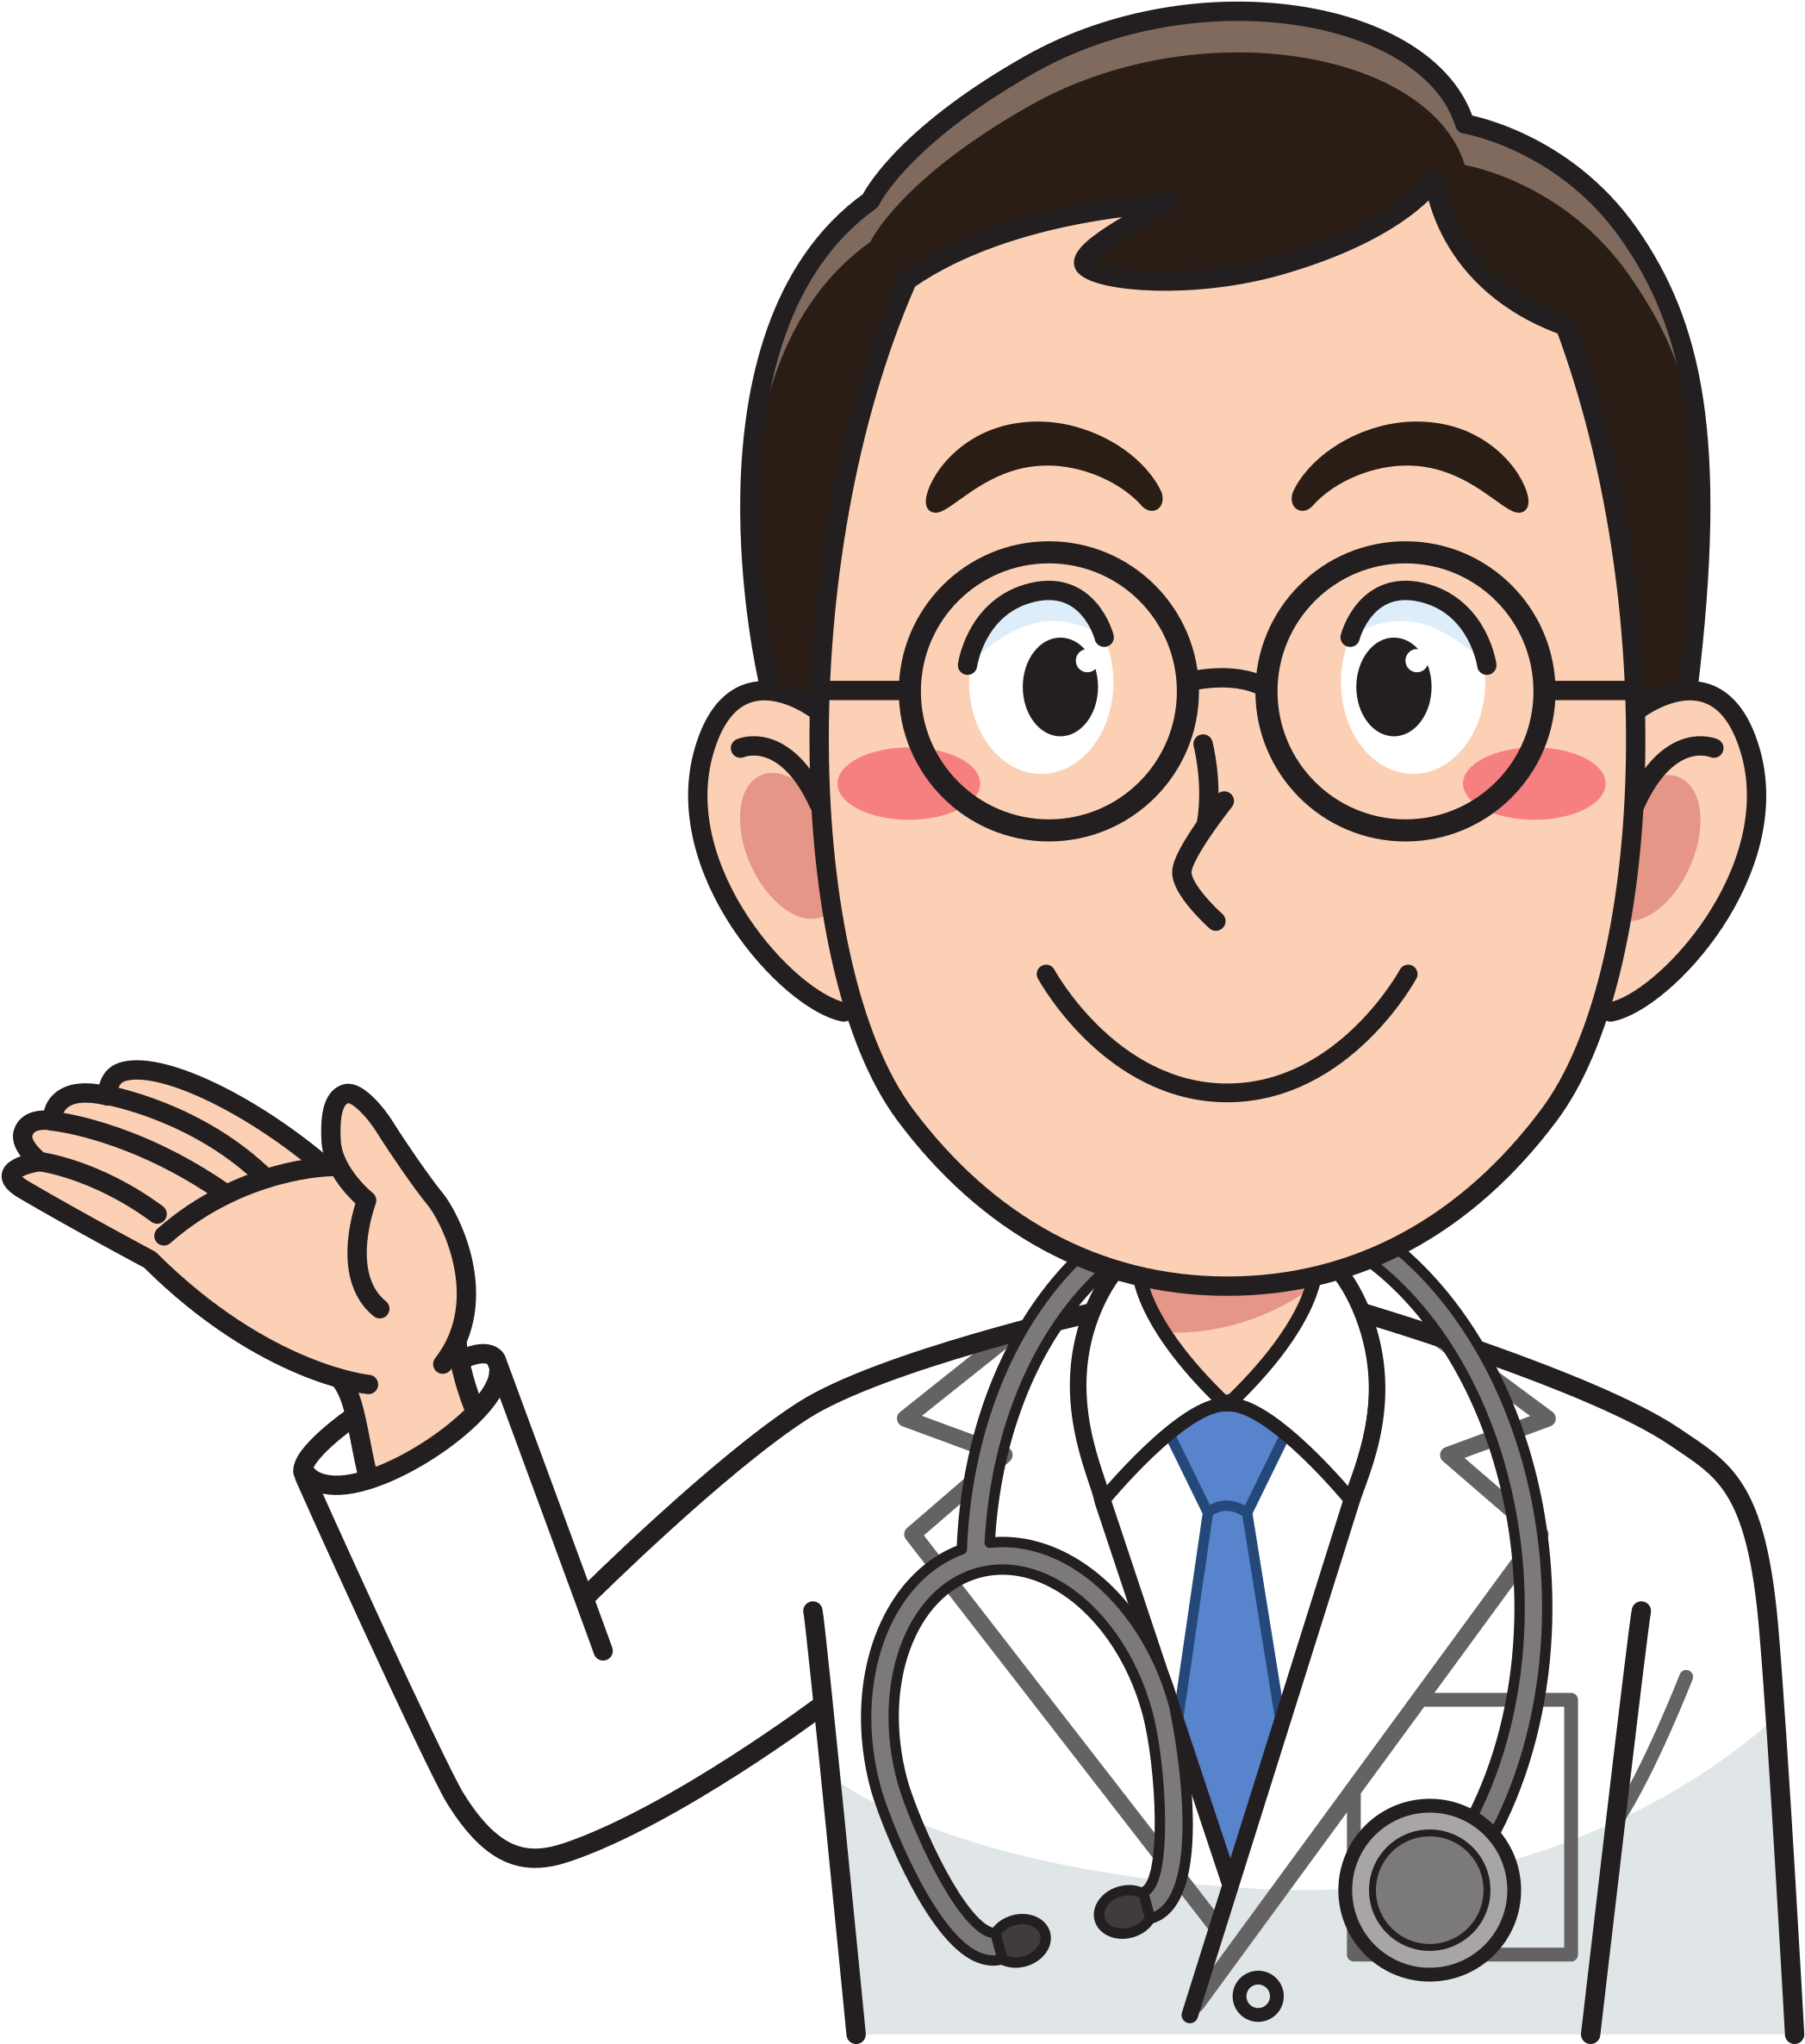 Mailman clipart doctor. Medicine man with stethoscope